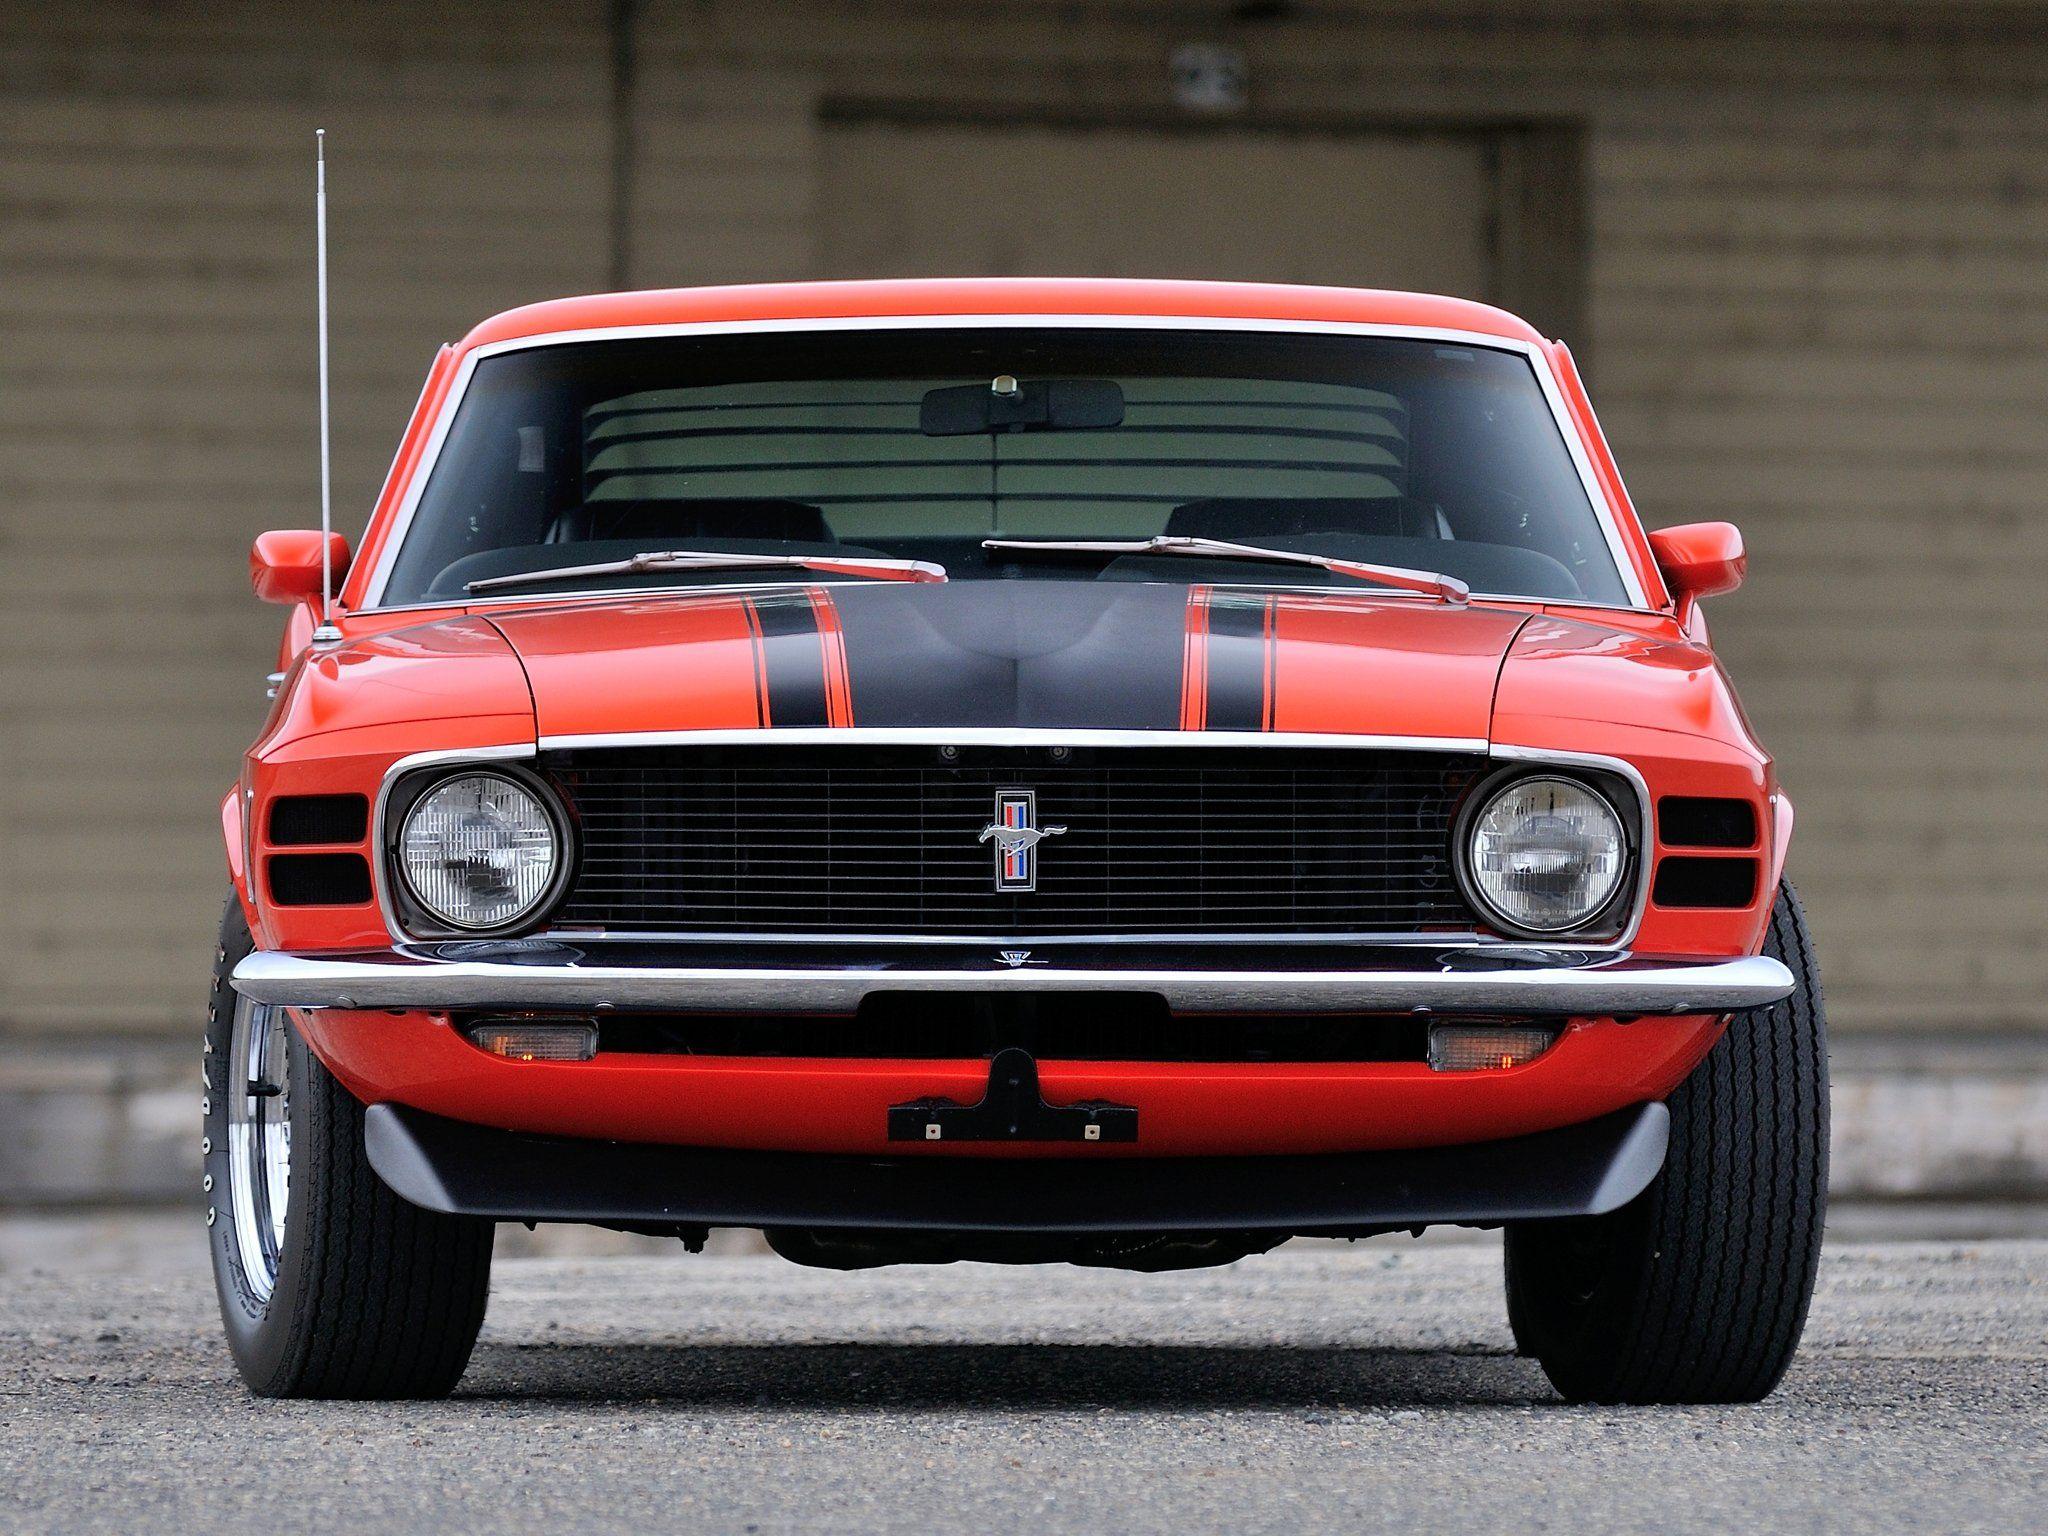 Ford Mustang Boss 429 muscle classic j wallpaperx1536